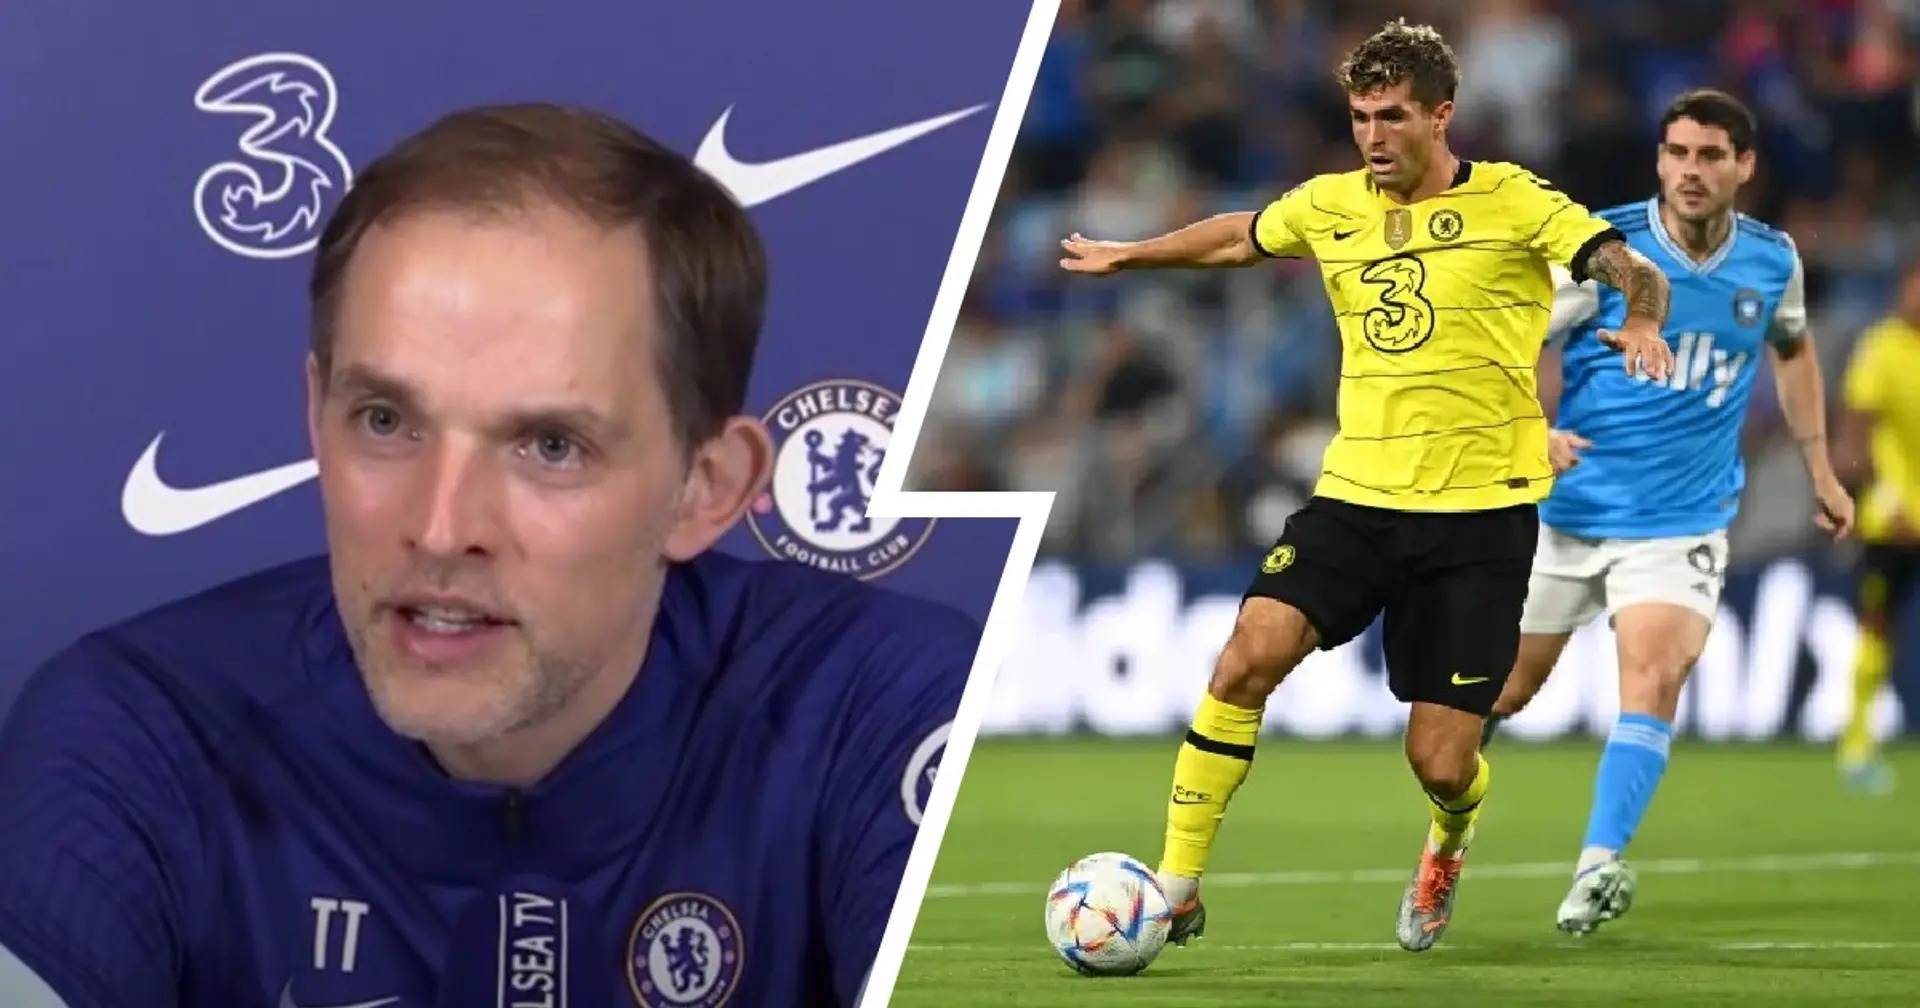 'Not good, not good at all': Tuchel breaks down what Chelsea did wrong against Charlotte